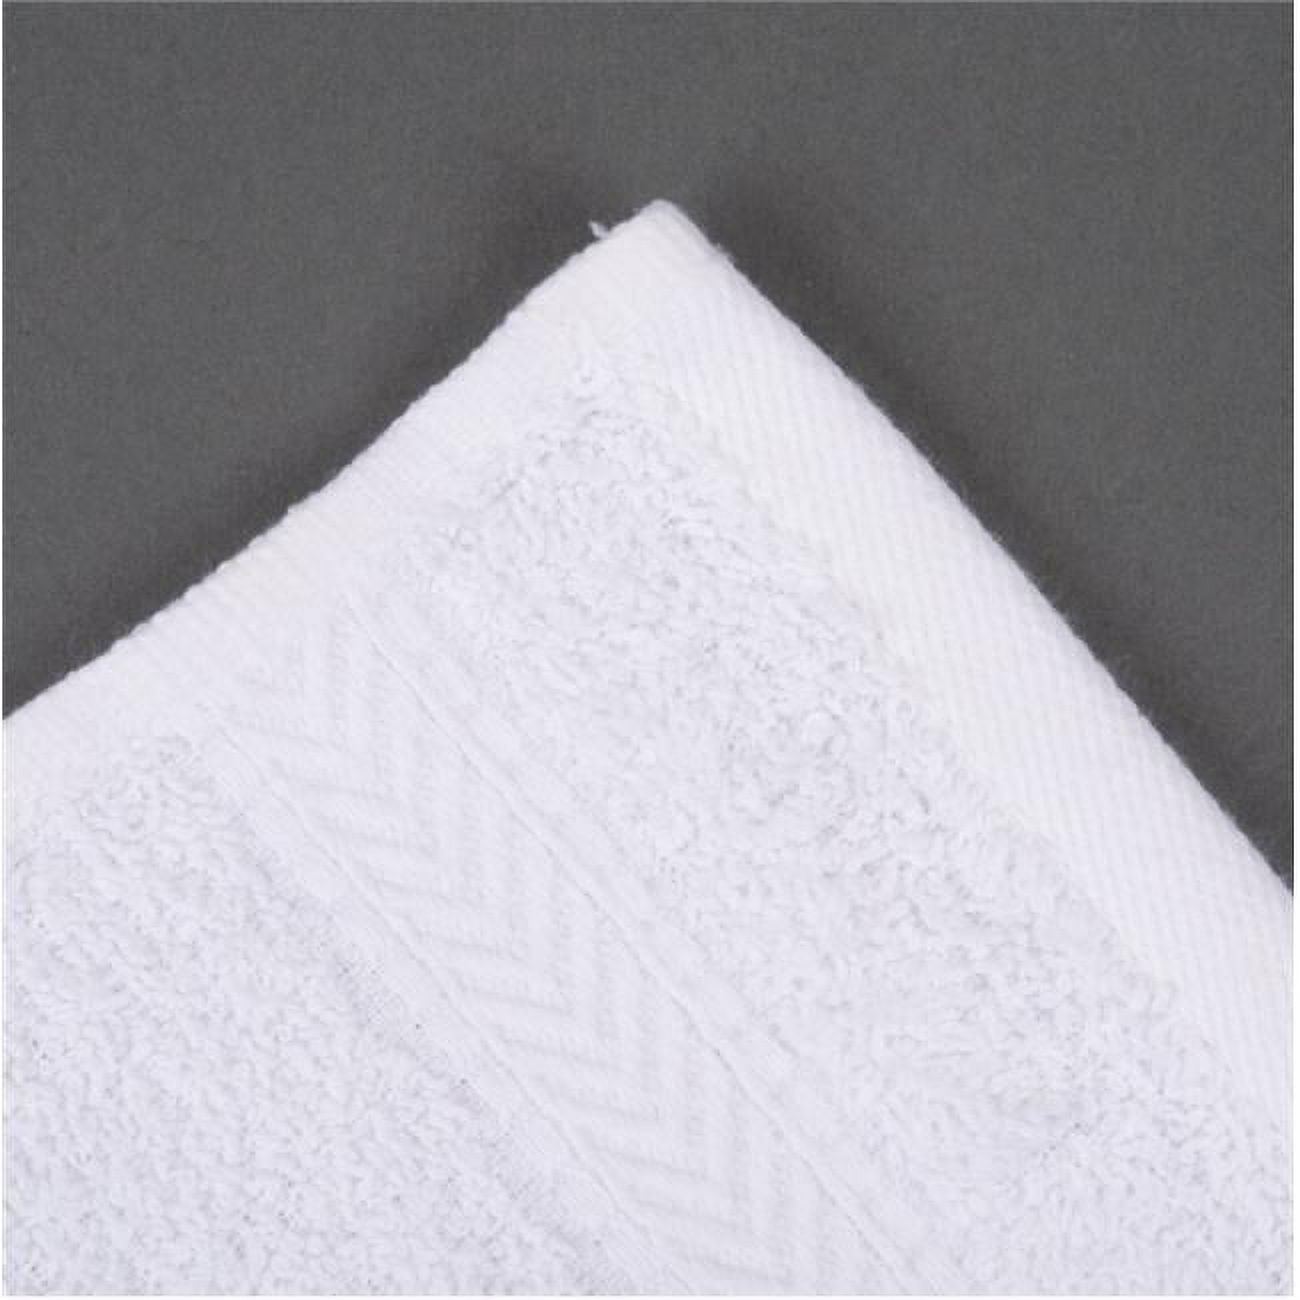 Waffle Small Square Towel Small Towels, Kitchen Towels,Baby Washcloths,  Size (11.8inch x 11.8inch), Soft & Absorbent Washcloths